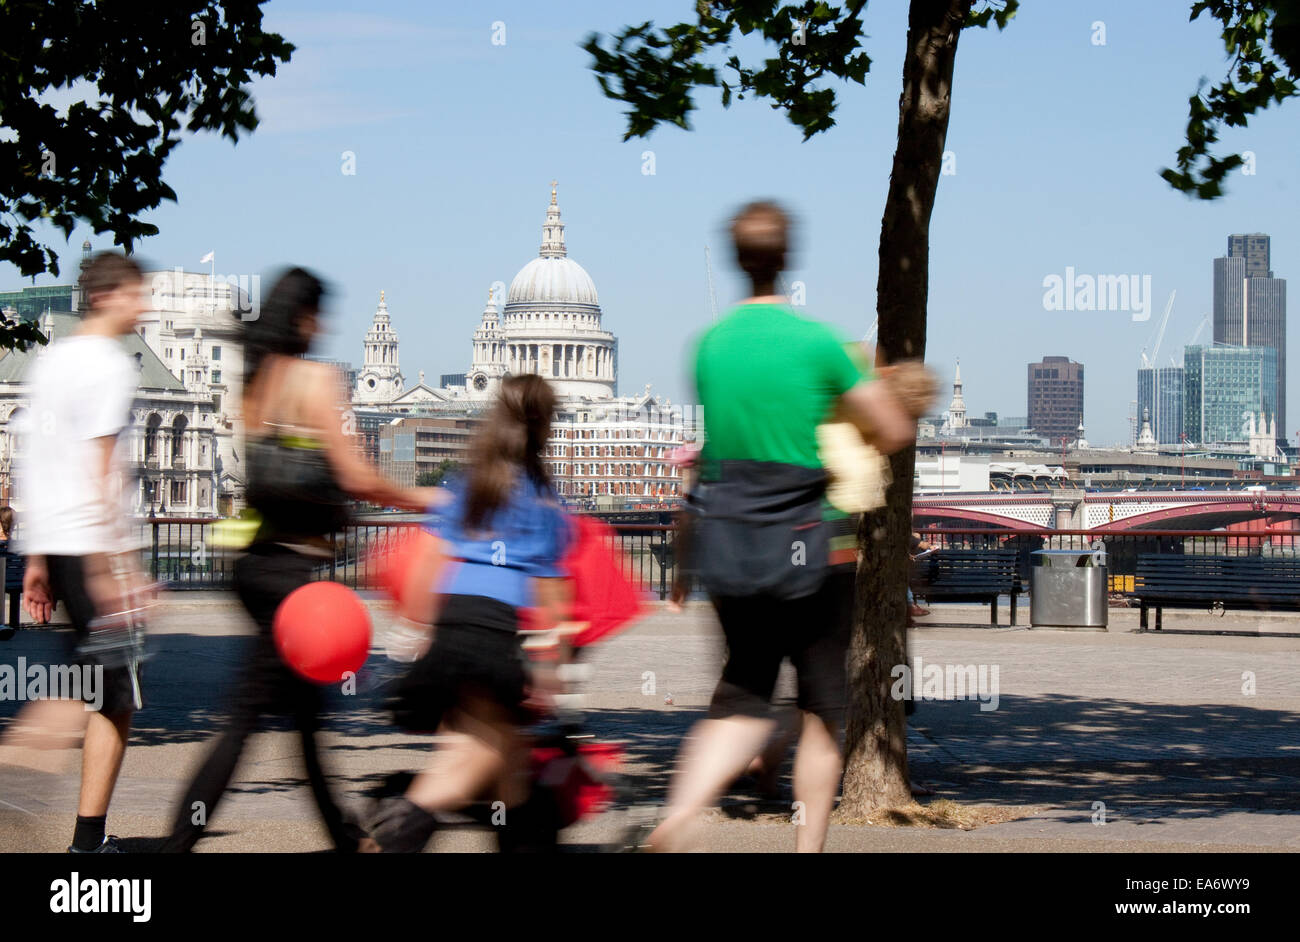 A view of the dome of Saint Pauls Cathedral across the River Thames with motion blurred family group in the foreground Stock Photo